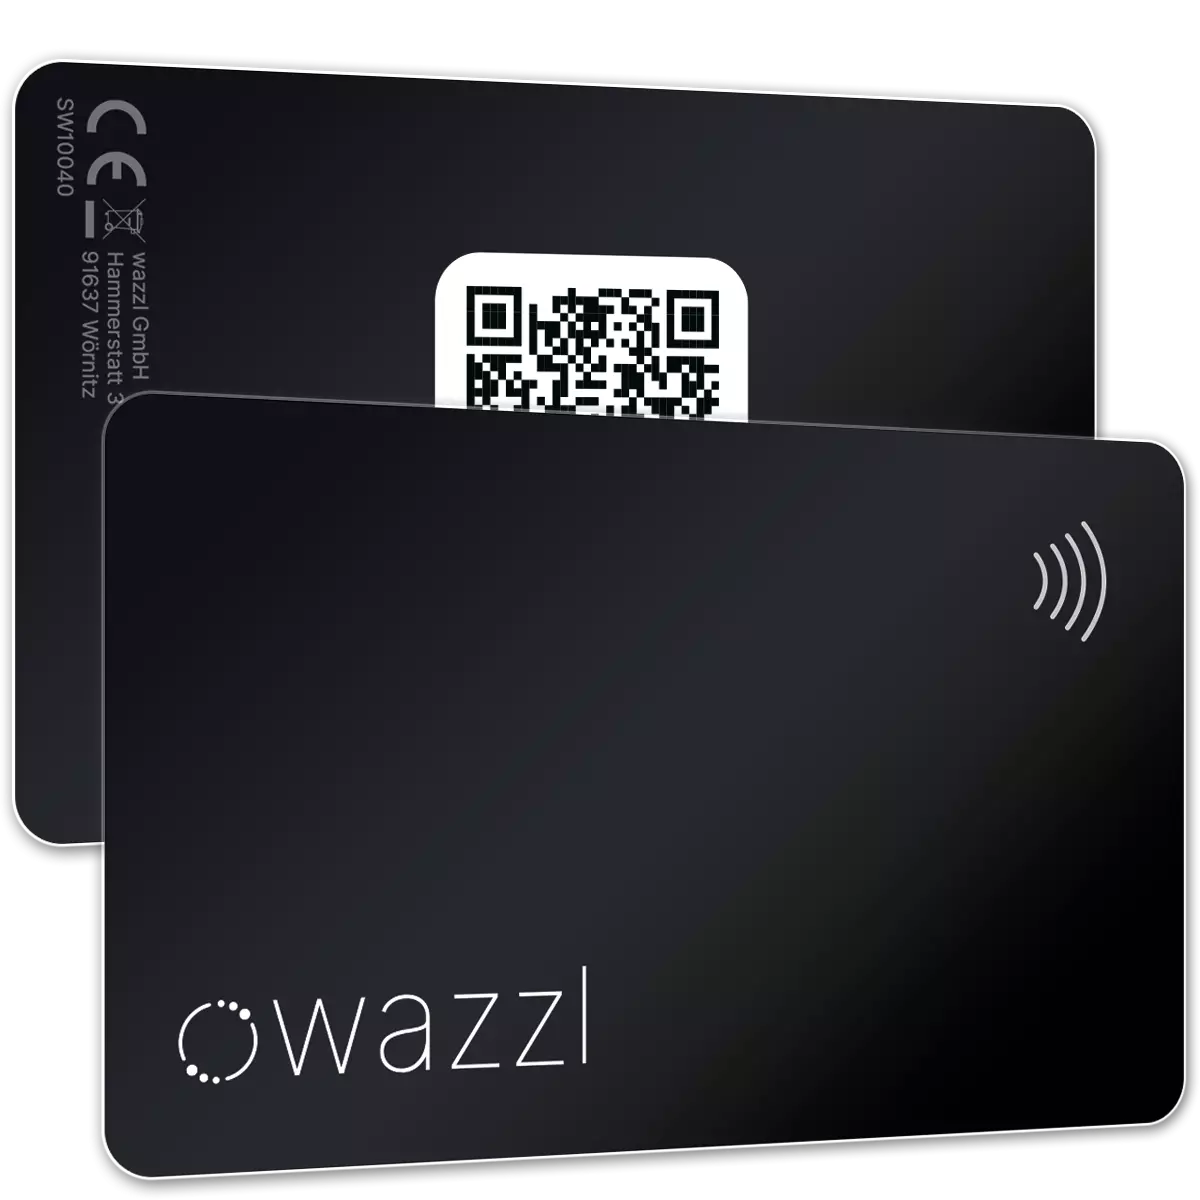 Smartcard with QR-Code - Digital business card